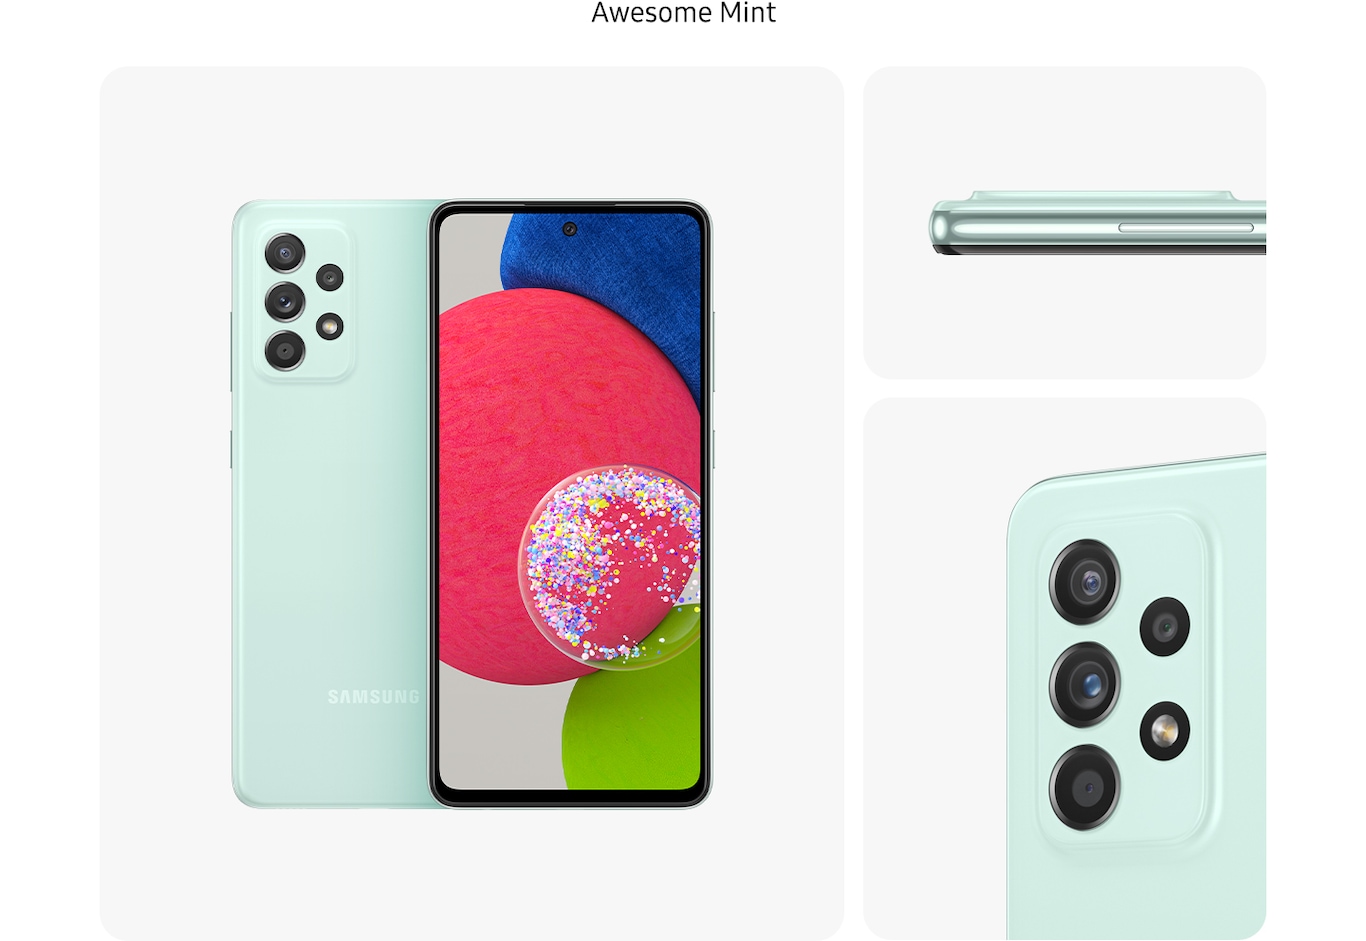 4. Mint
Galaxy A52s 5G in Awesome Mint, seen from multiple angles to show the design: rear, front, side and close-up on the rear camera.